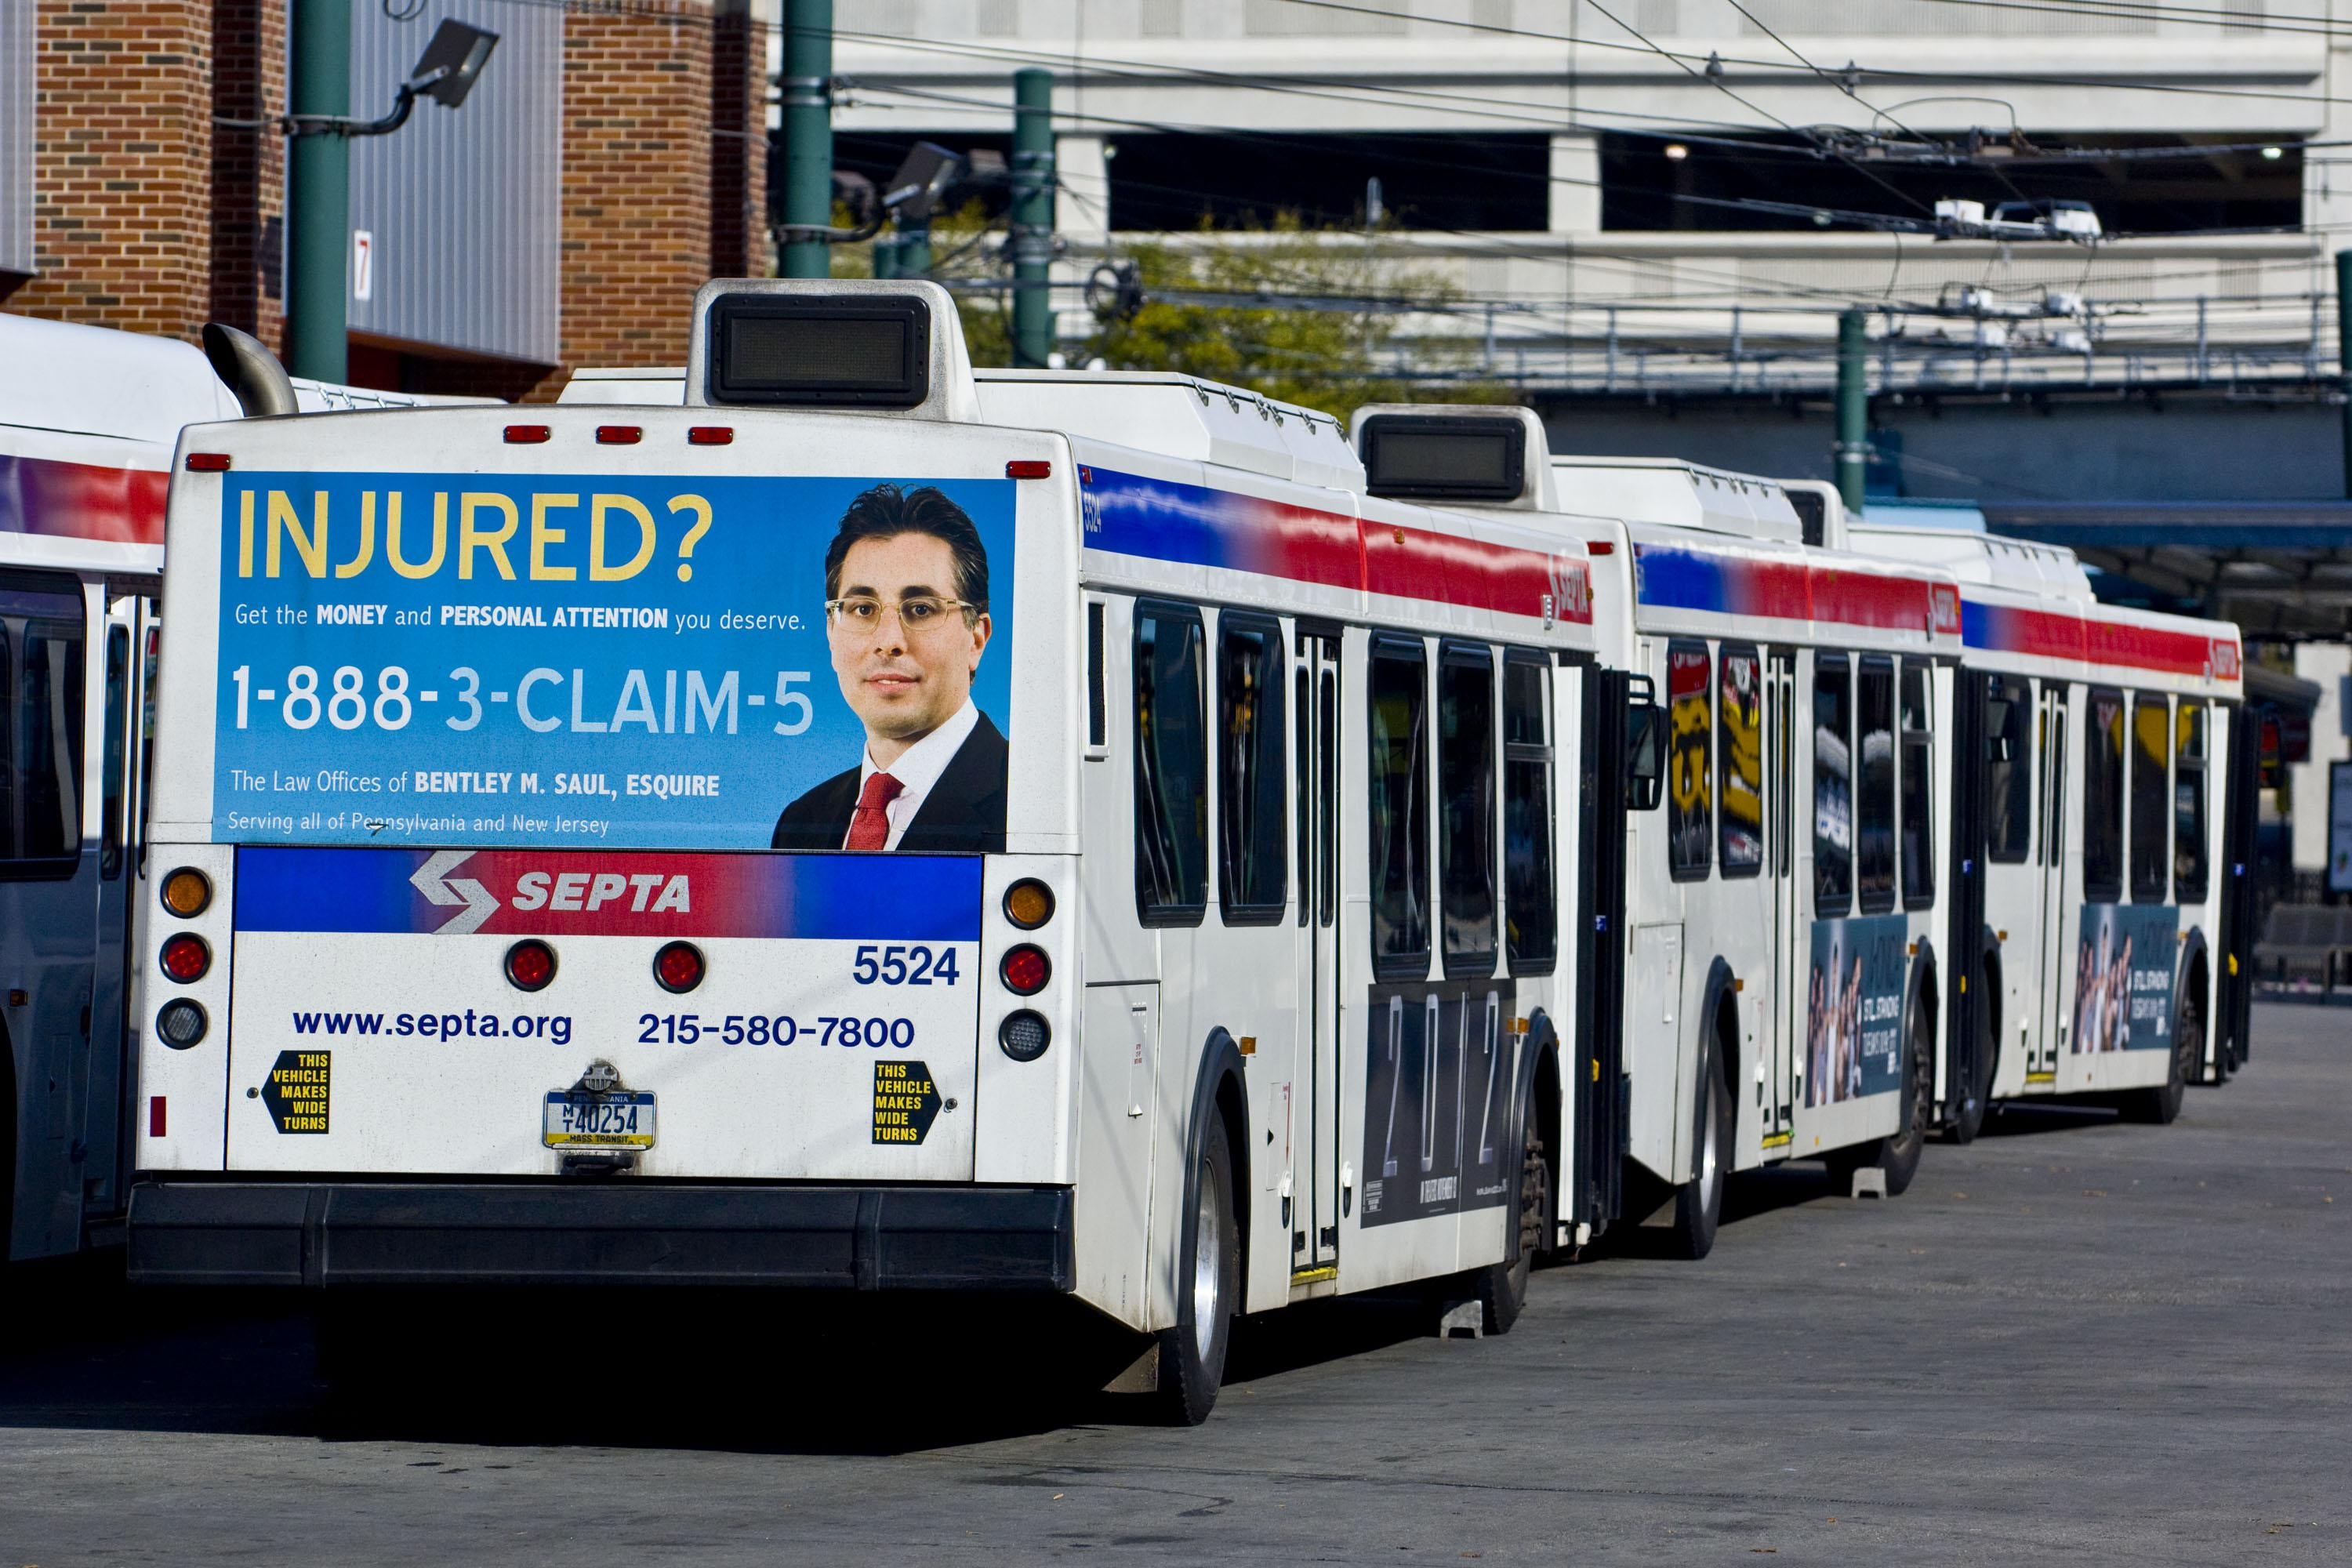 An ad on the back of a SEPTA bus.